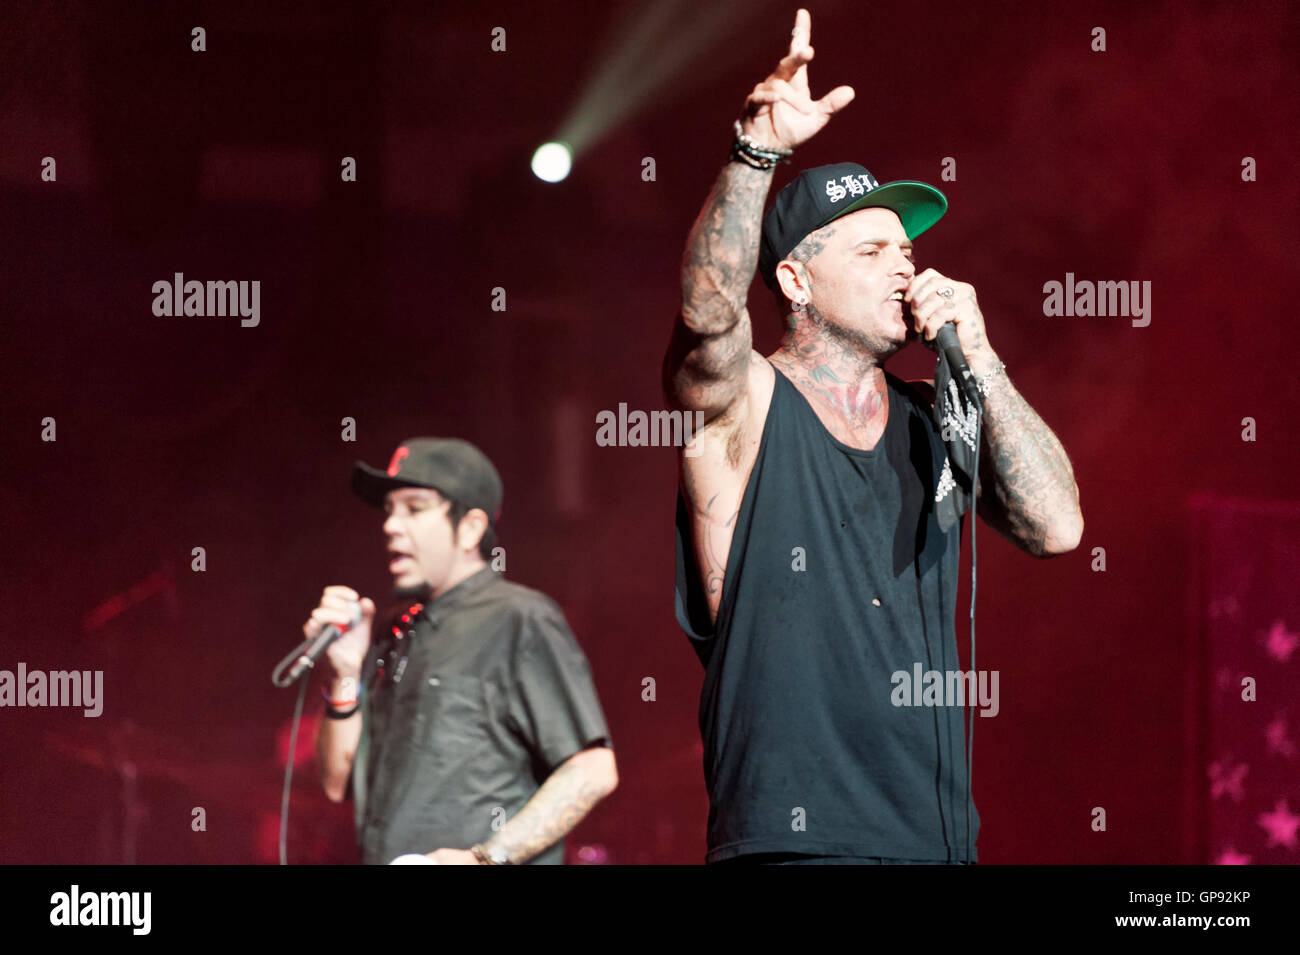 Las Vegas, Nevada, USA. 2nd September, 2016. Seth Brooks Binzer, better known by his stage name Shifty Shellshock and Epic Mazur of the band Crazy Town at The Orleans Arena - 'Make America Rock Again' Alternative Rock Music Tour - Credit:  Ken Howard/Alamy Live News Stock Photo